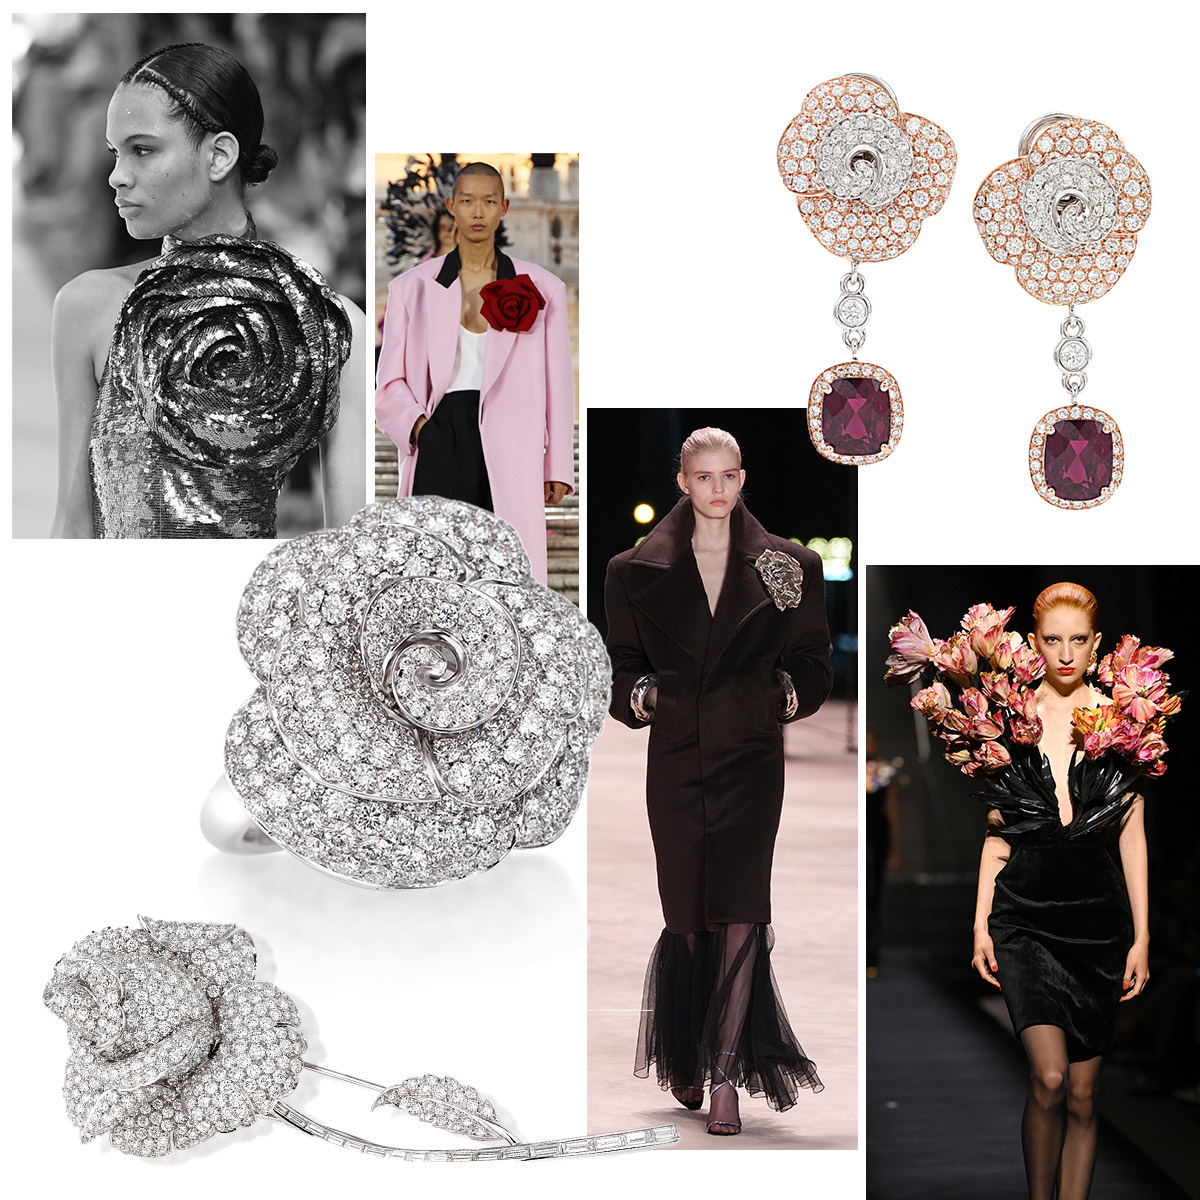 Elie Saab F/W ’22, Valentino Haute Couture F/W ’22, PICCHIOTTI Rose Collection earrings with ruby and diamond drops, Schiaparelli F/W ‘22, Saint Laurent F/W ’22, PICCHIOTTI Iconic Rose Brooch, PICCHIOTTI Rose Collection ring in white diamond 